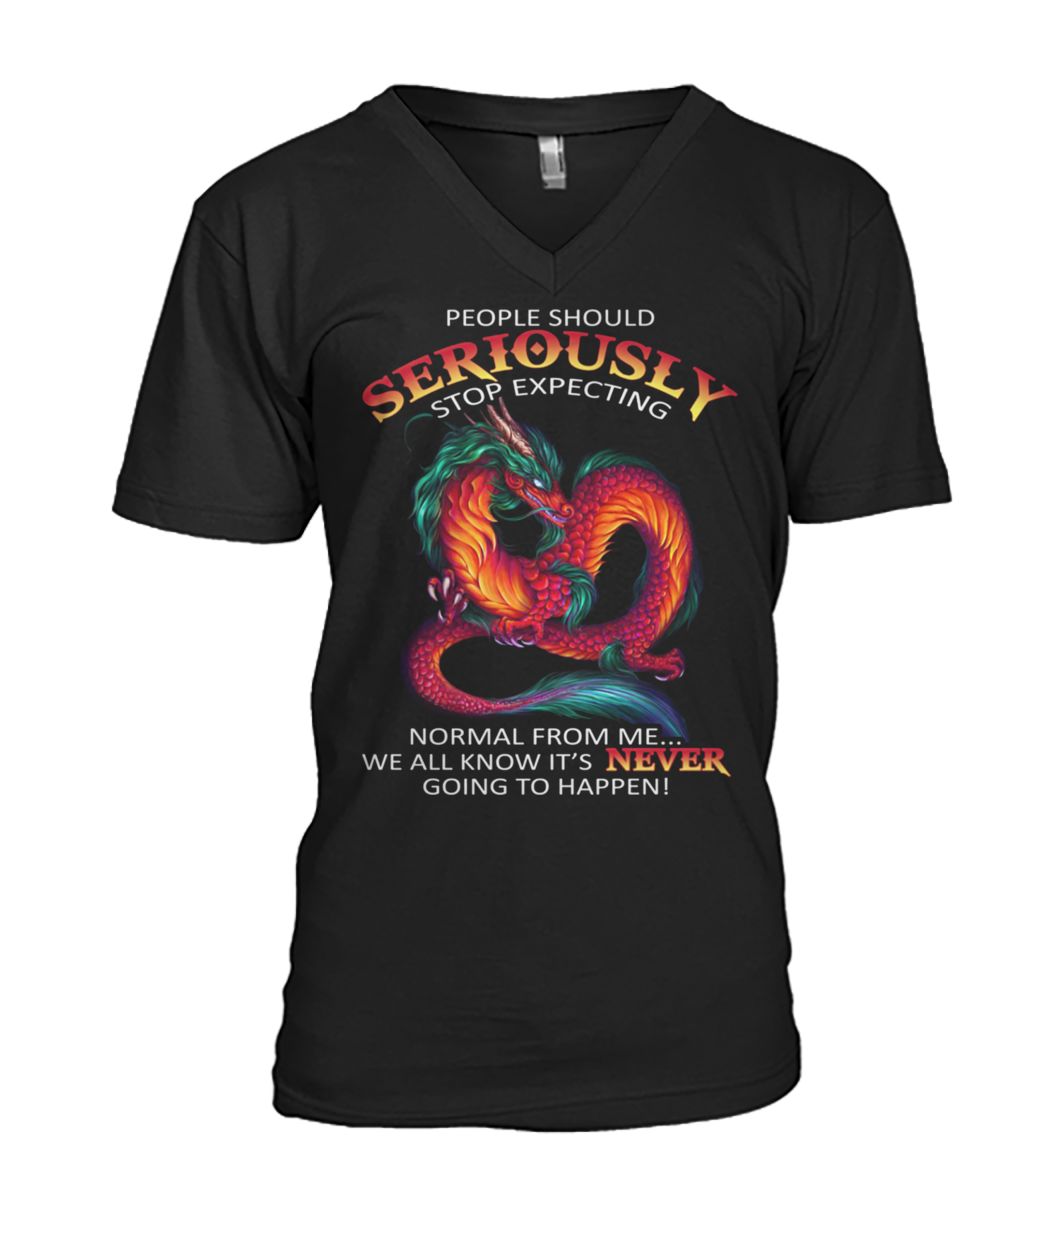 Red dragon people should seriously stop expecting normal from me mens v-neck